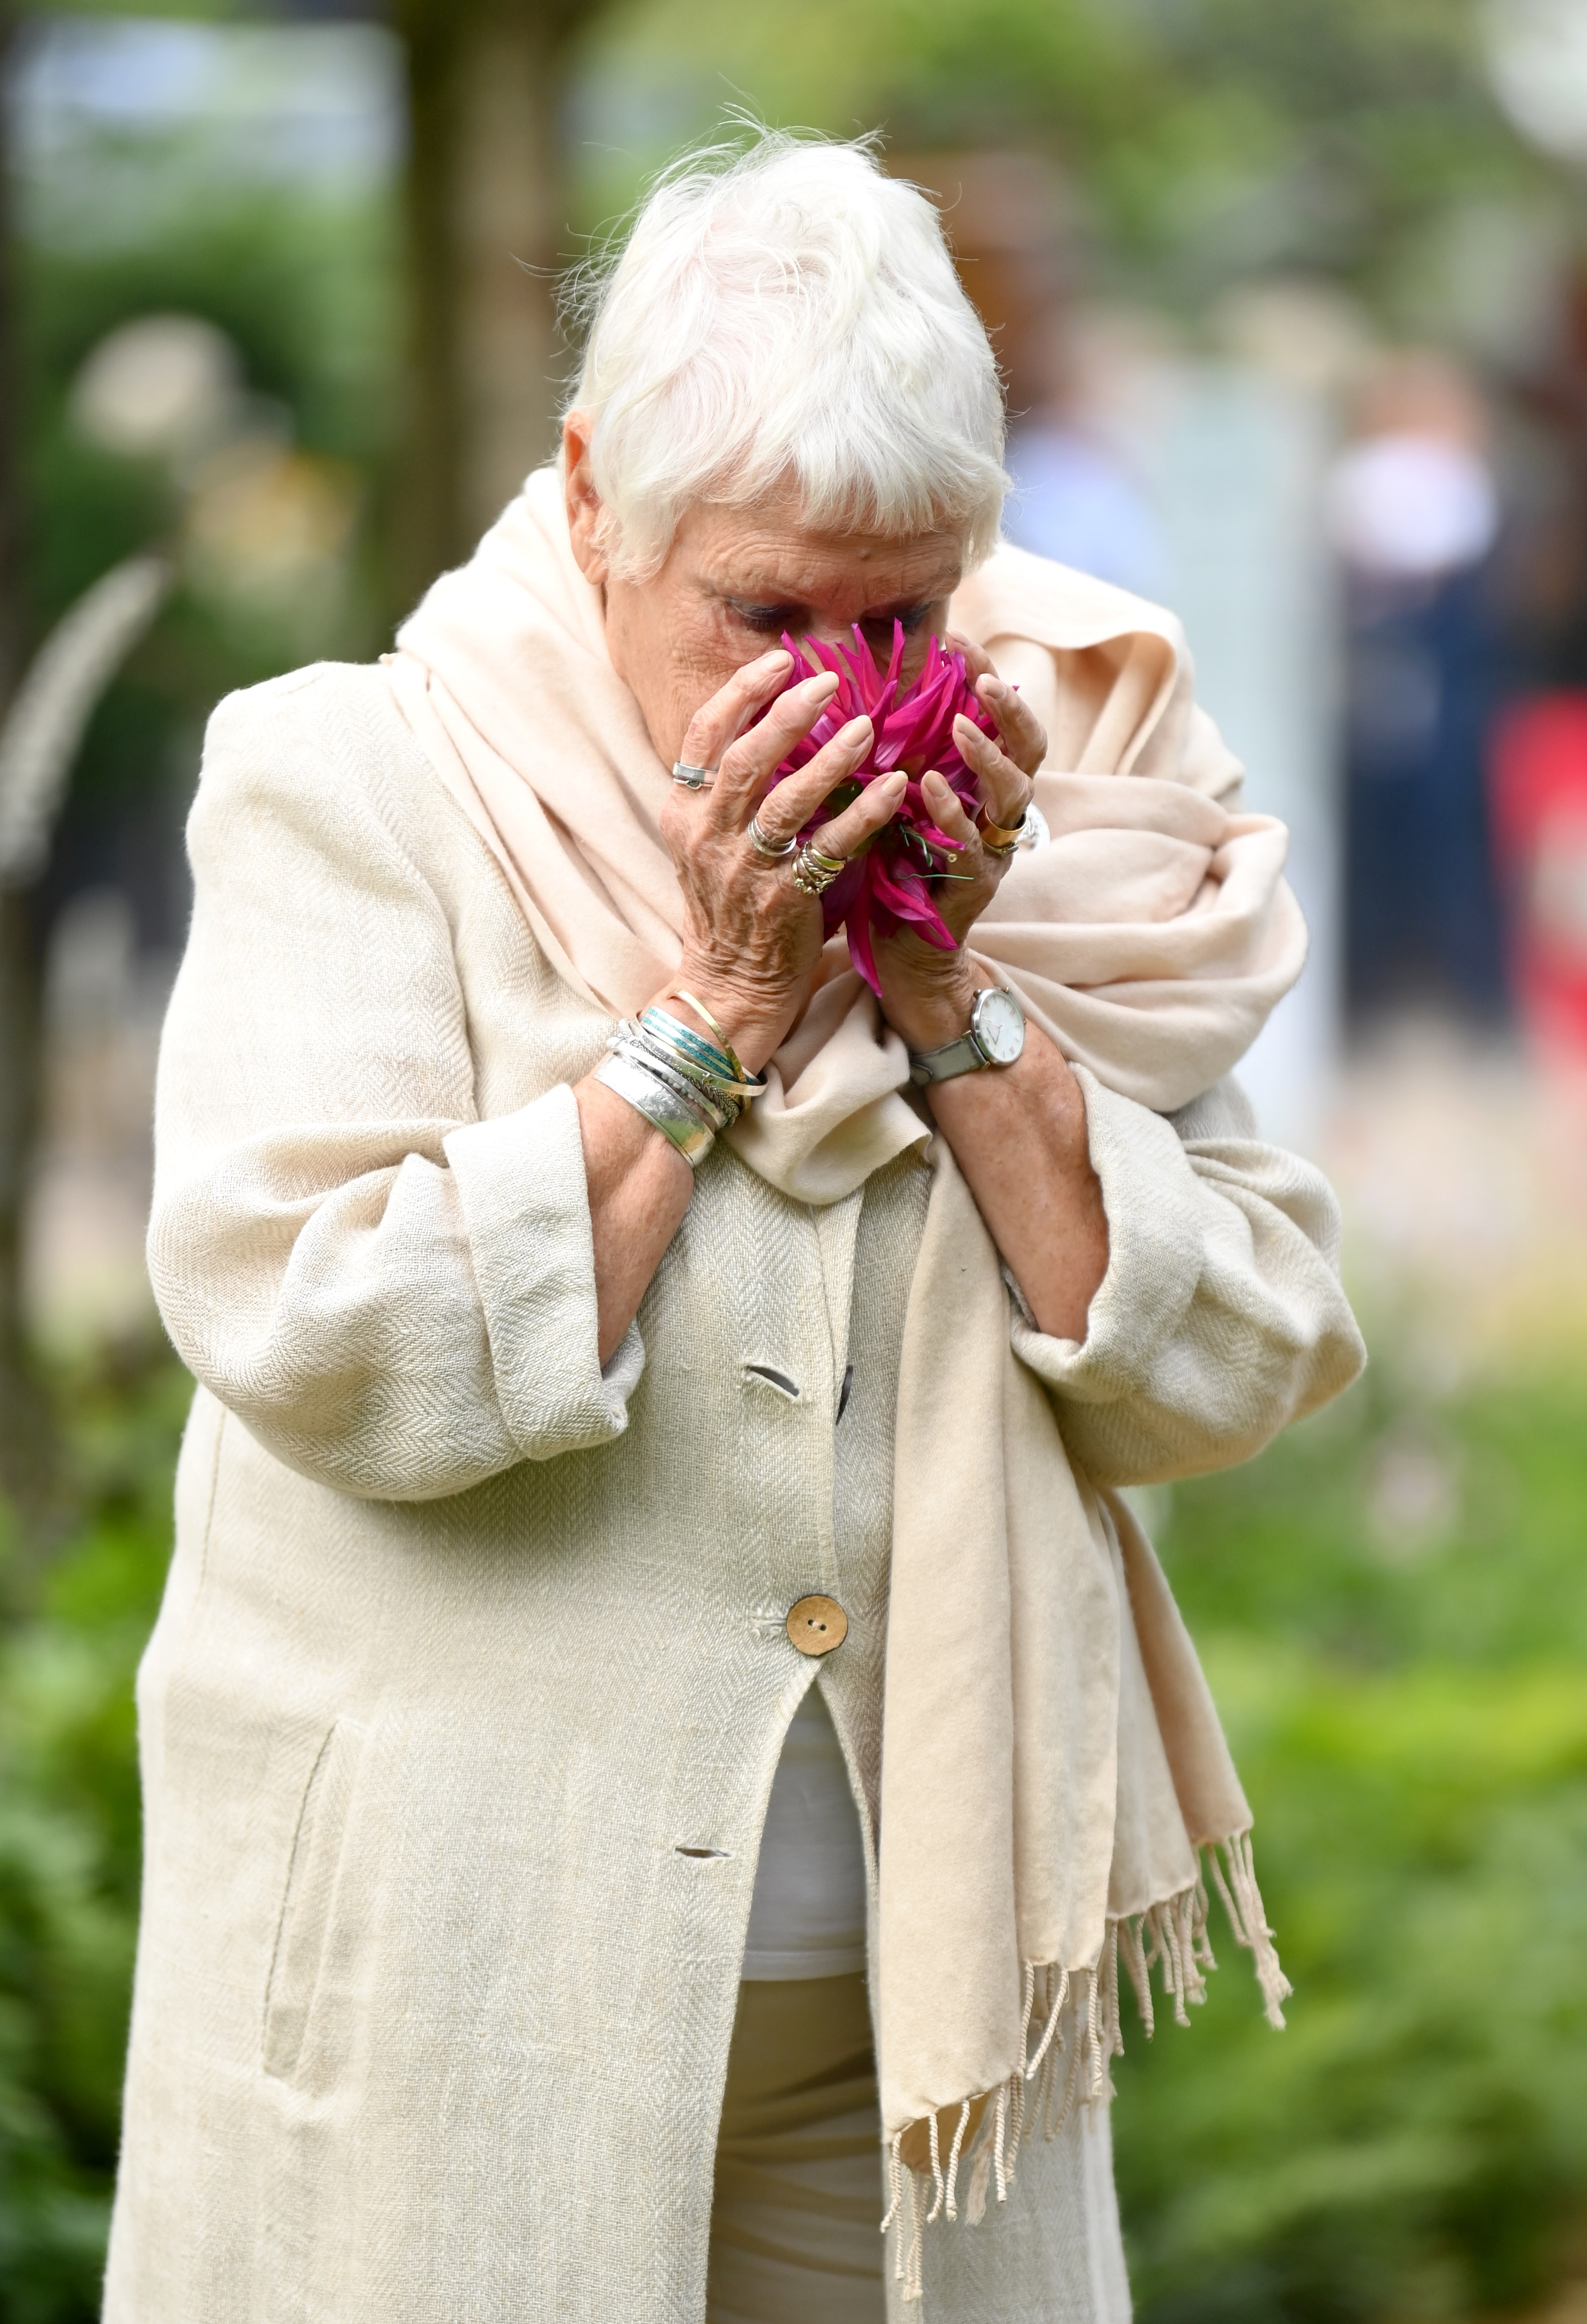 Dame Judy Dench attends the RHS Chelsea Flower Show on September 20, 2021 in London, England. | Source: Getty Images